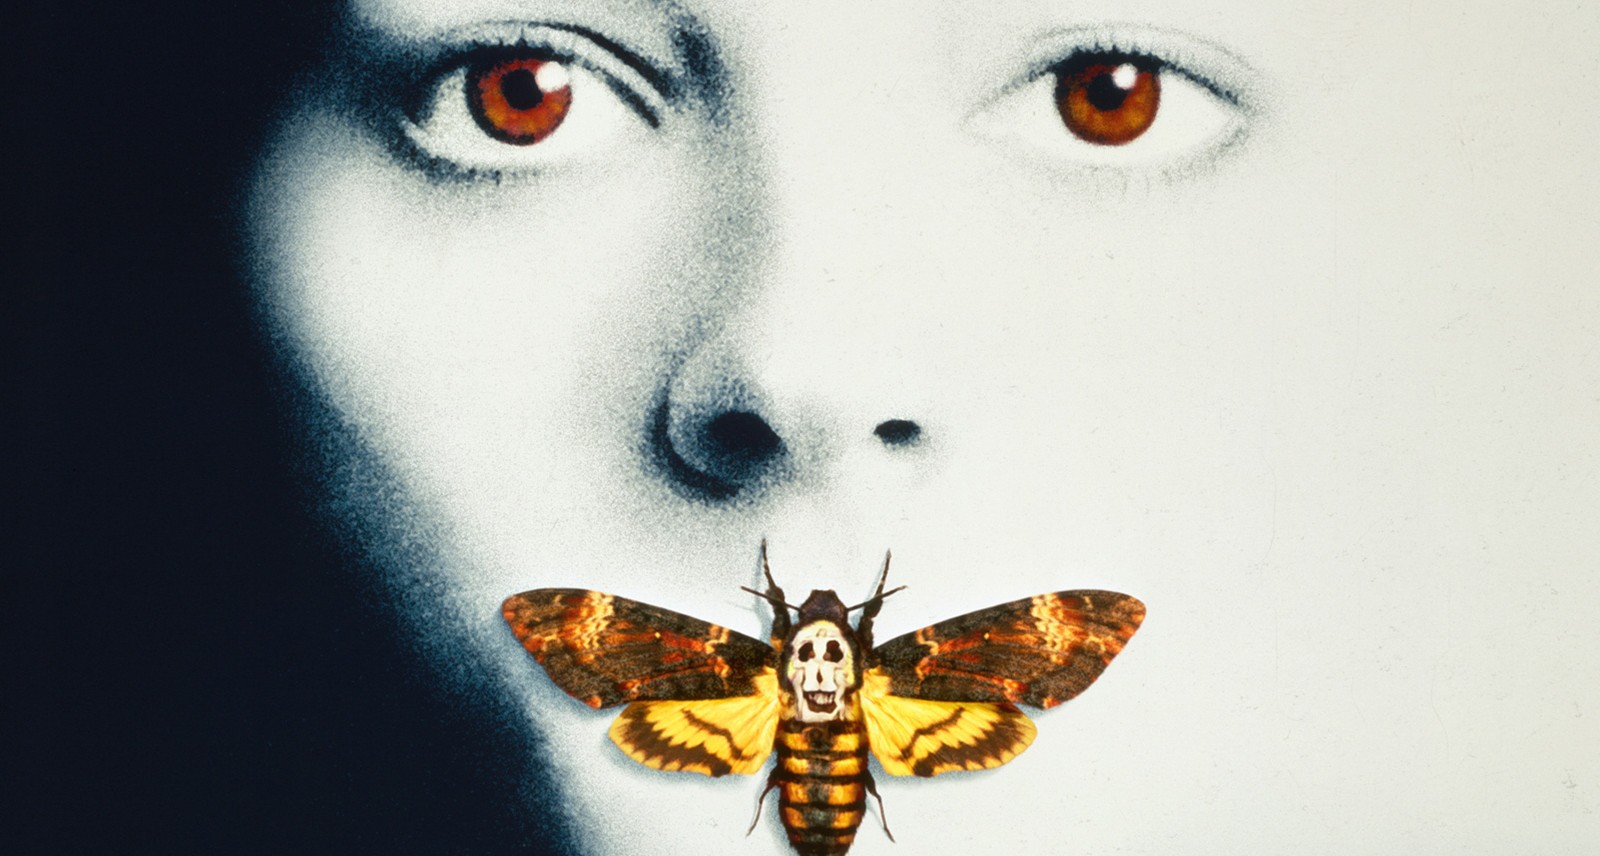 Where Can You Watch Silence Of The Lambs ‘The Silence of the Lambs’ Just Turned 25, and It’s Still the Scariest